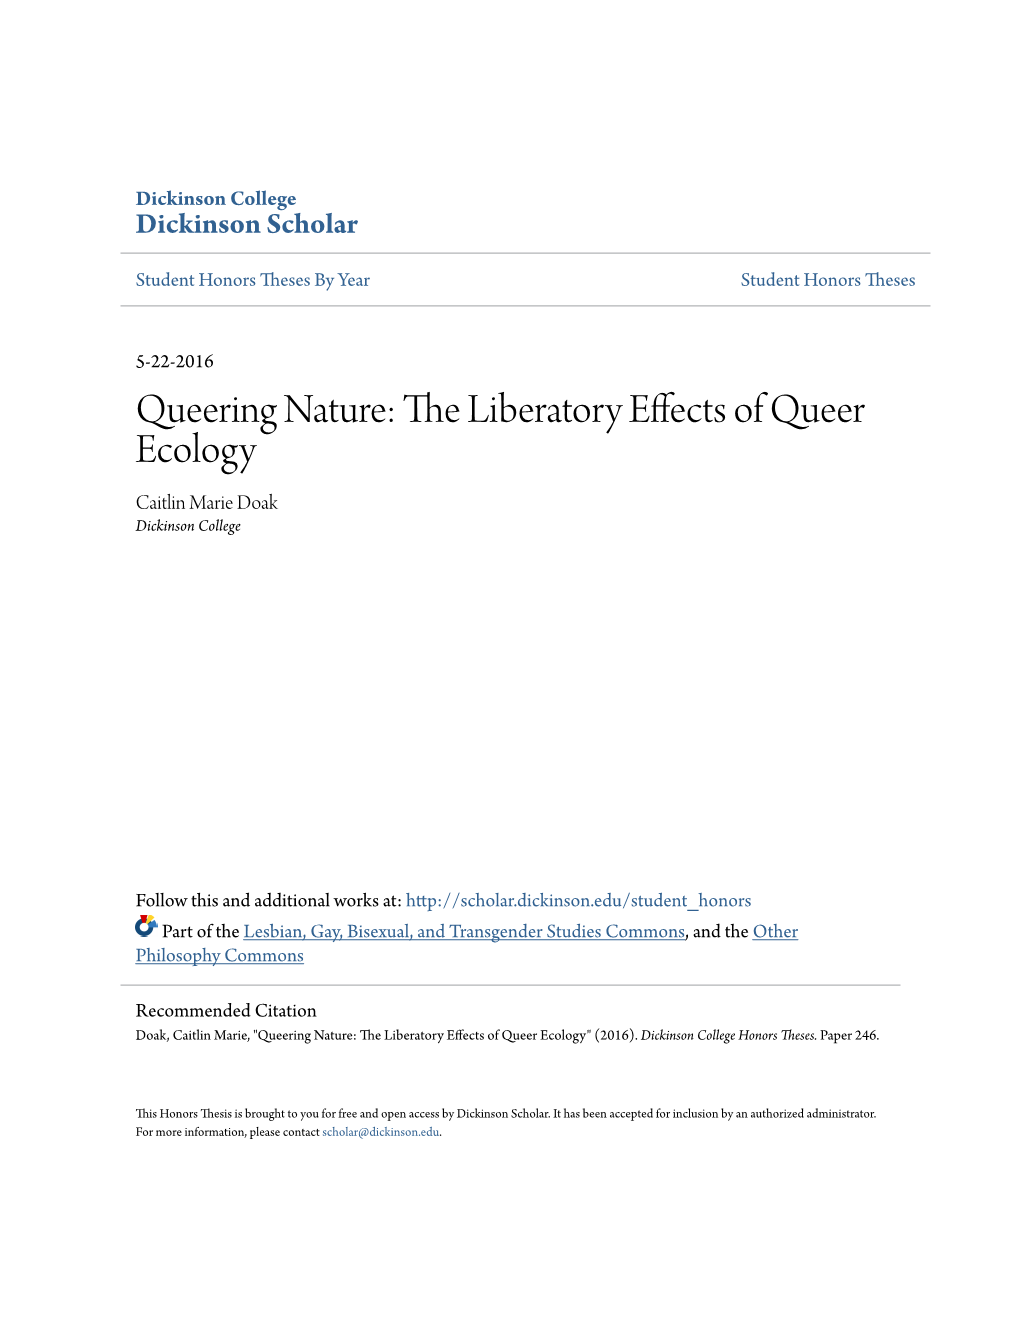 Queering Nature: the Liberatory Effects of Queer Ecology Caitlin Marie Doak Dickinson College